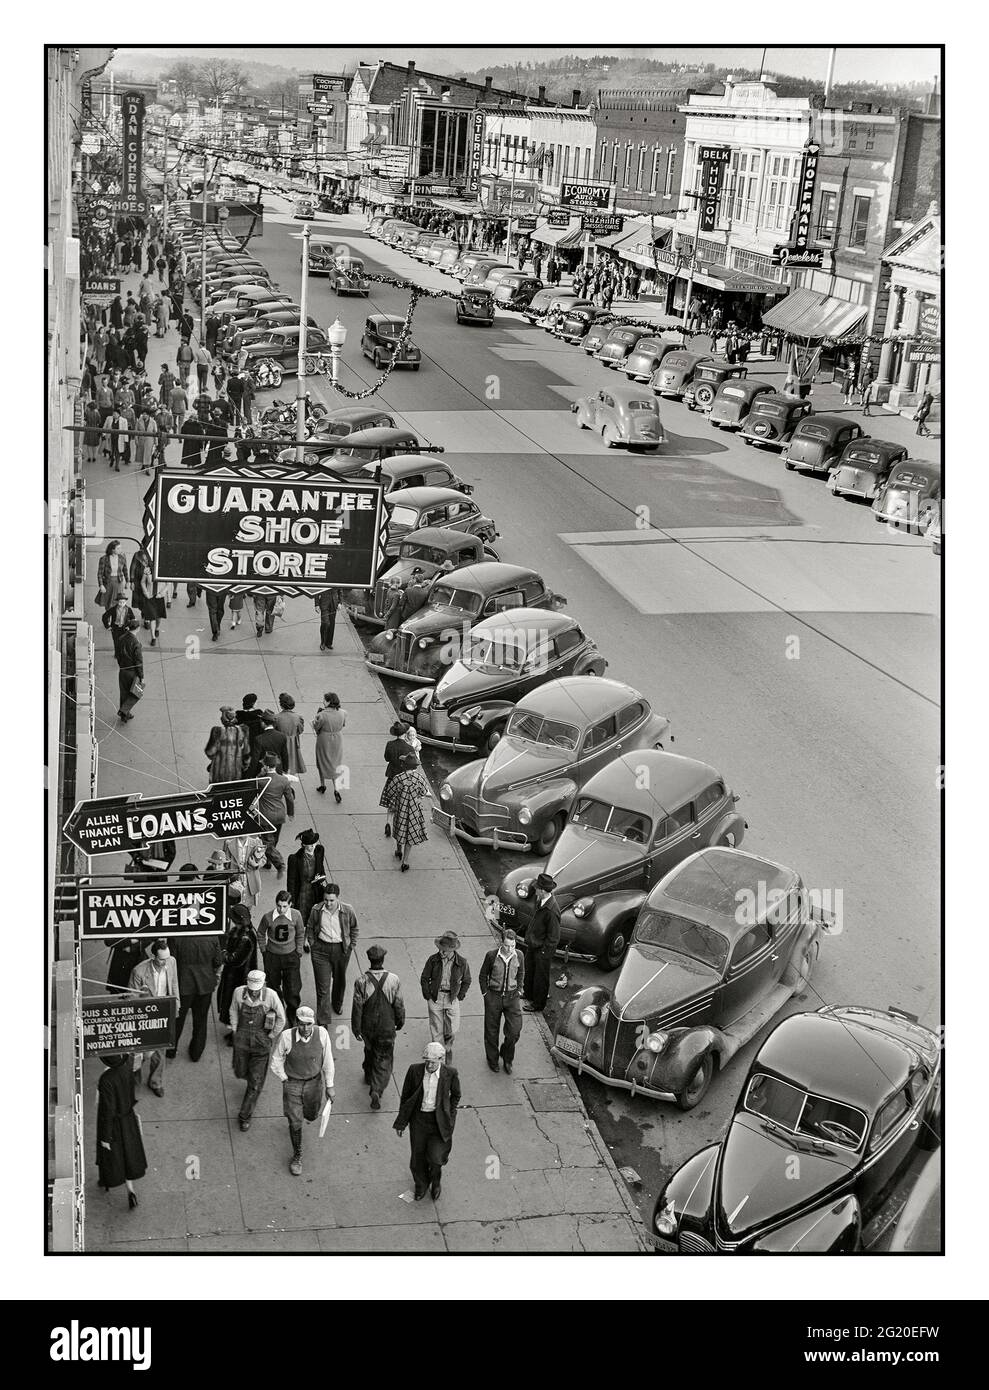 1940 Main Street Gadsden. 'Christmas shopping people and American  cars parked, at a time just before USA entered WW2, Busy prosperous upscale town in Alabama. America USA Stock Photo